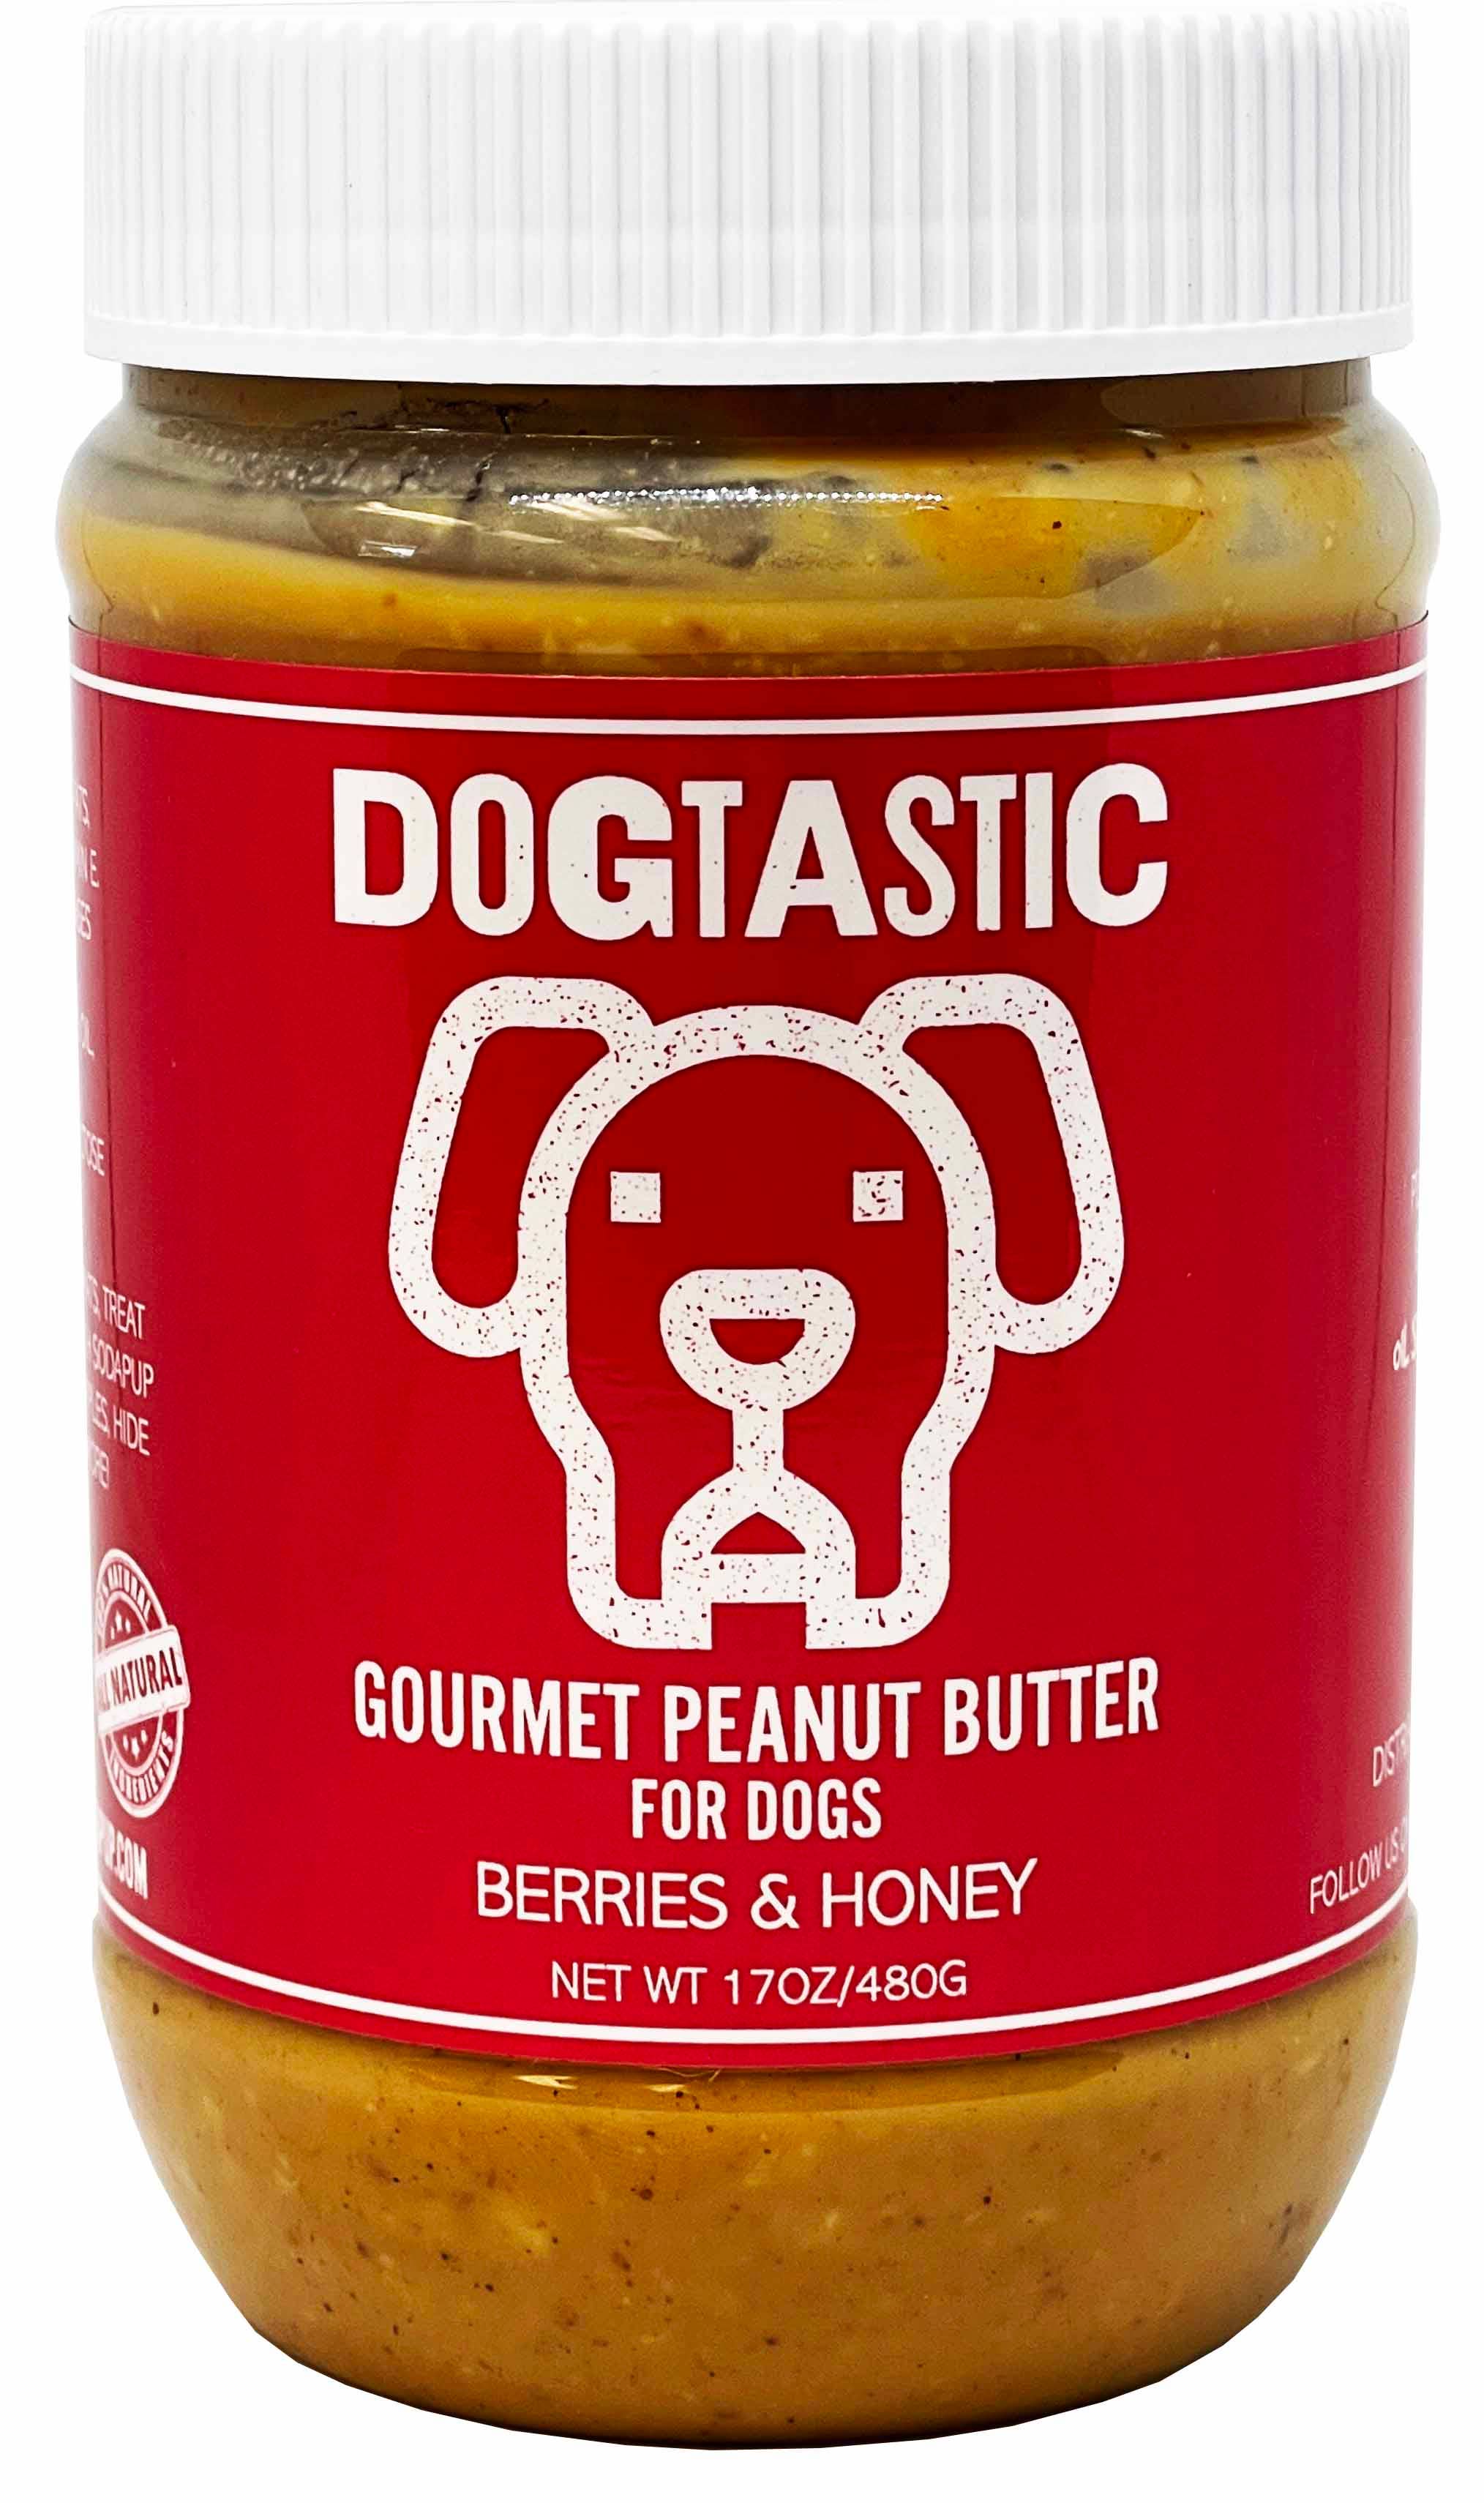 SodaPup - Dogtastic Gourmet Peanut Butter for Dogs - Berries & Honey Flavor